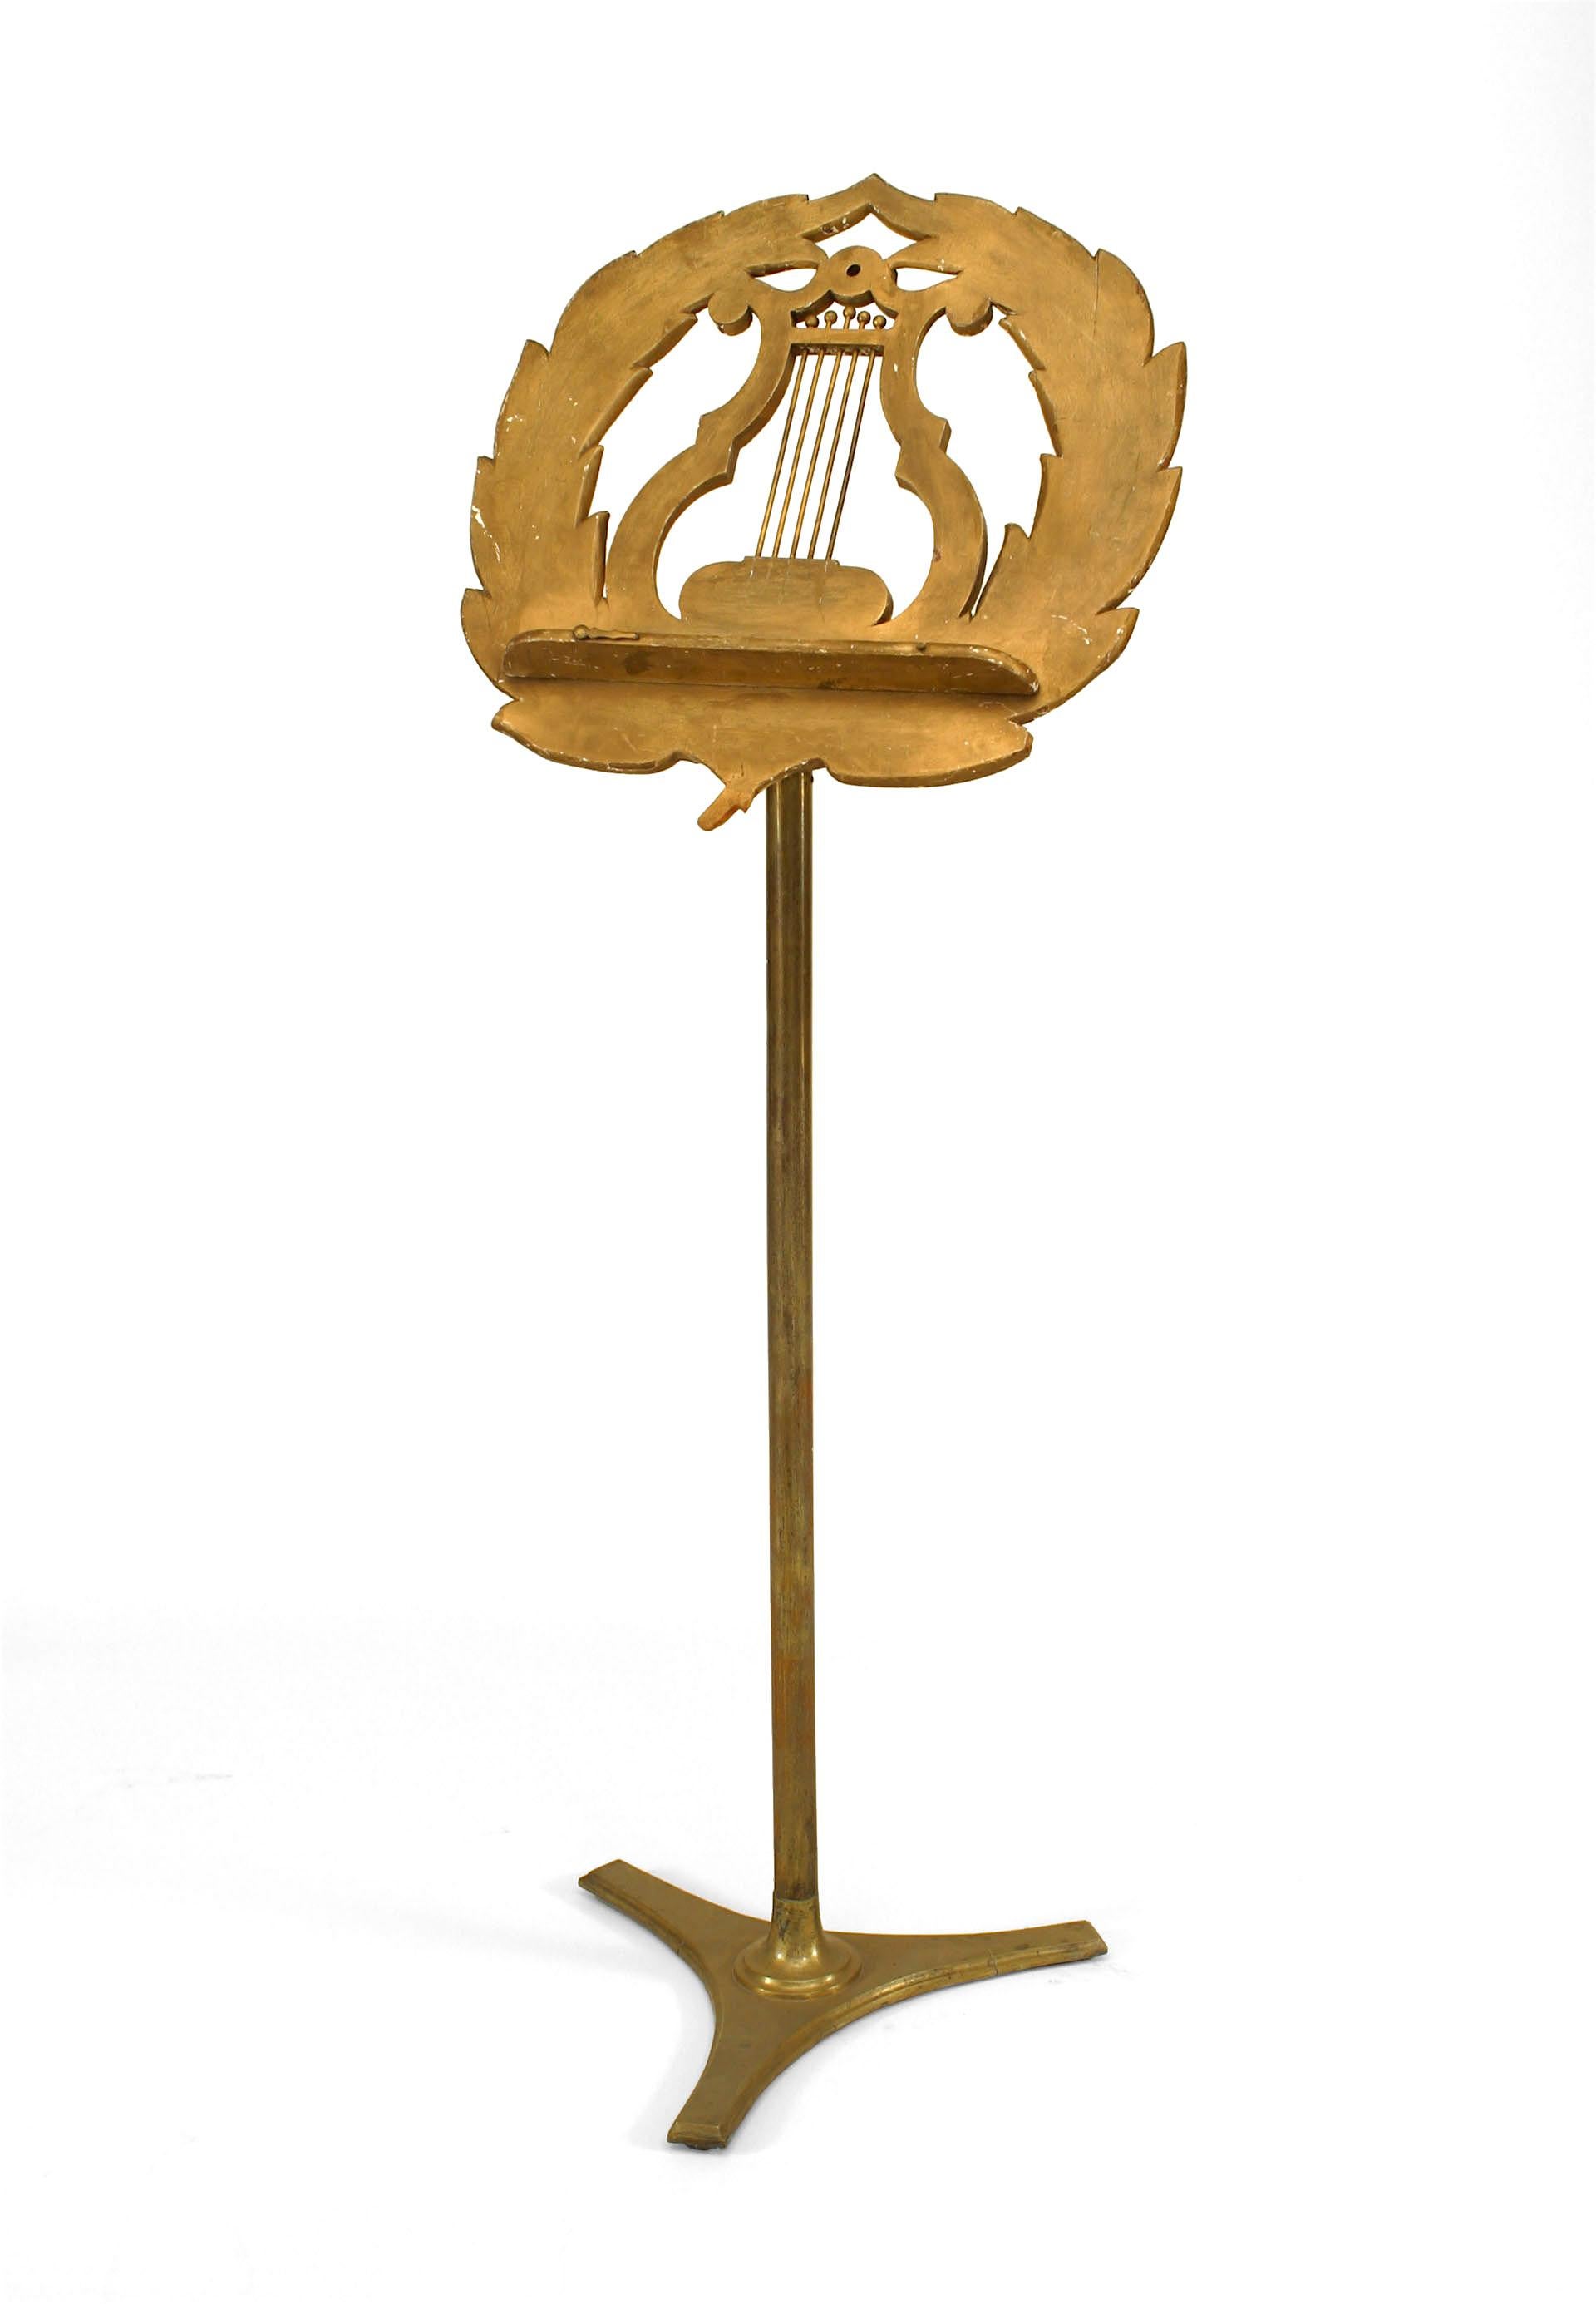 Nineteenth century French adjustable brass music stand with a giltwood lyre design top supported by a column and triangular base.